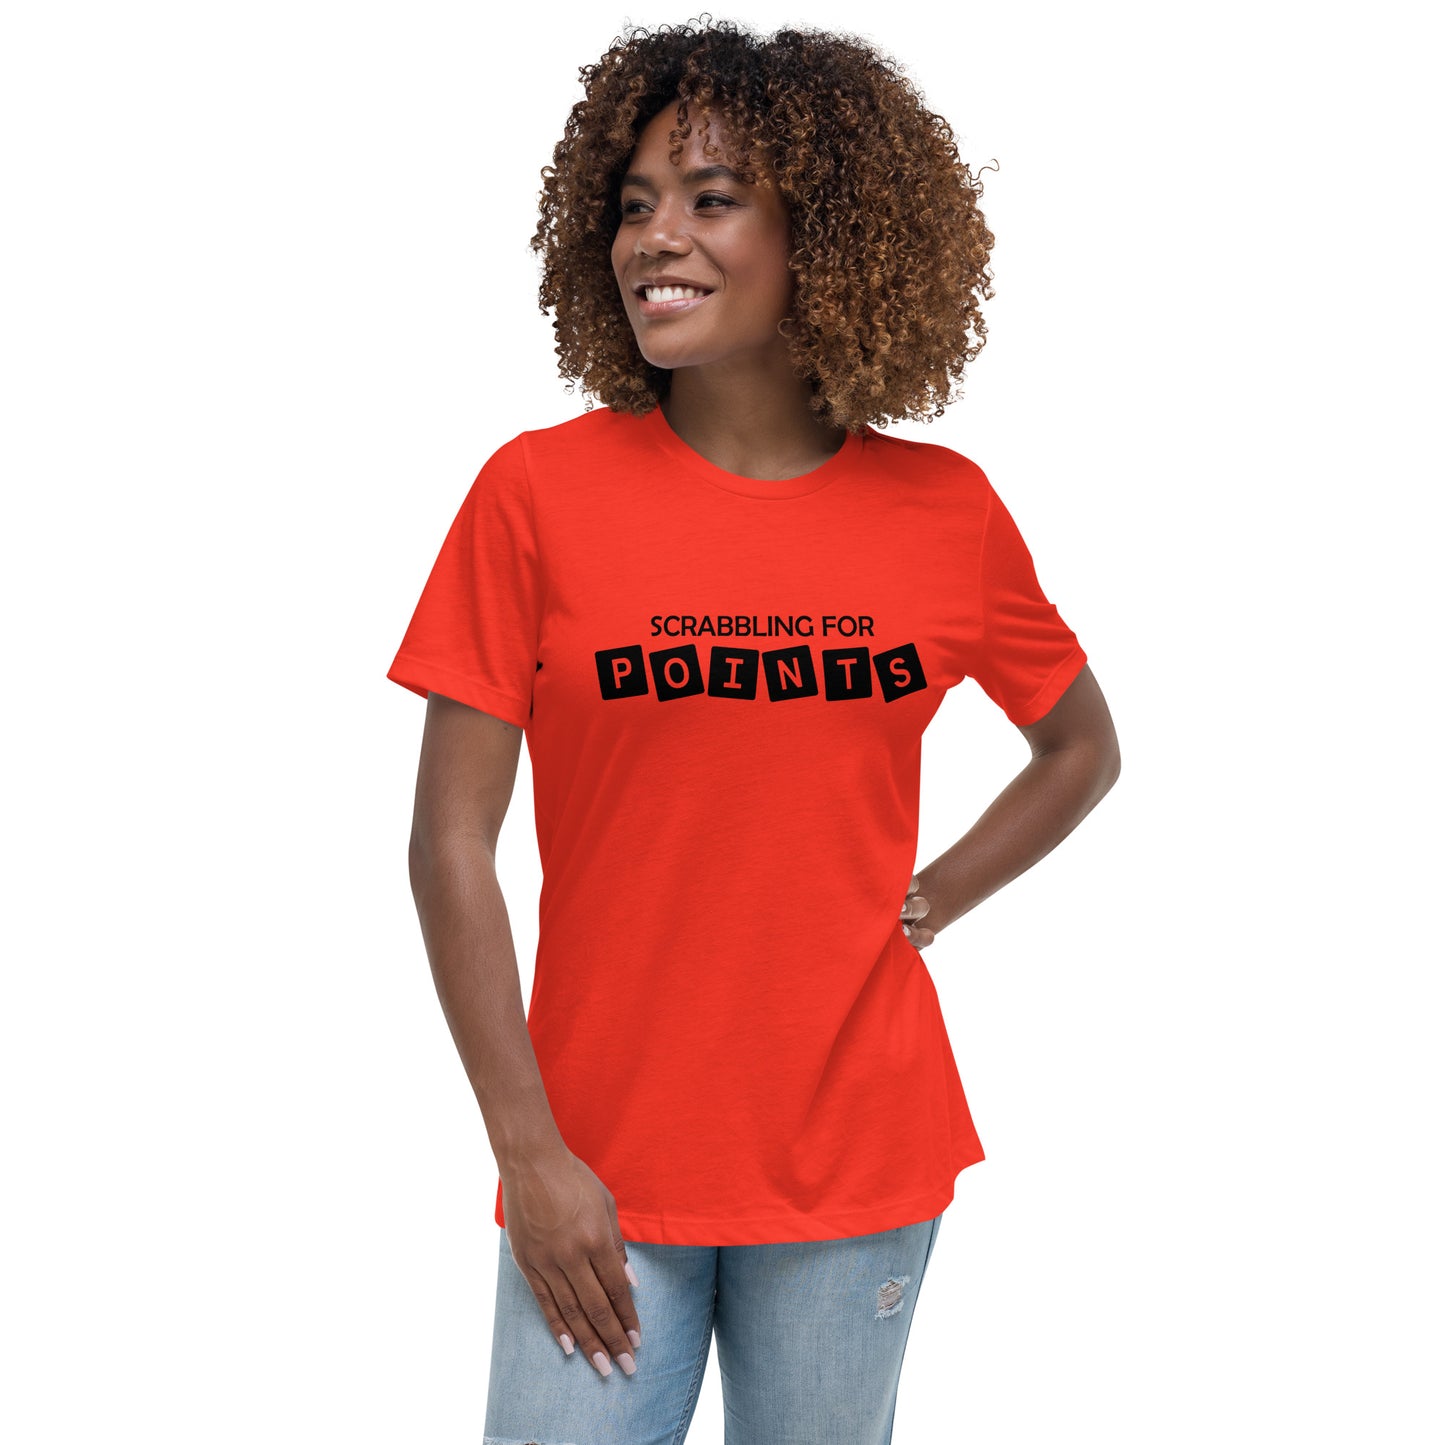 Scrabbling for Points Women's Relaxed T-Shirt